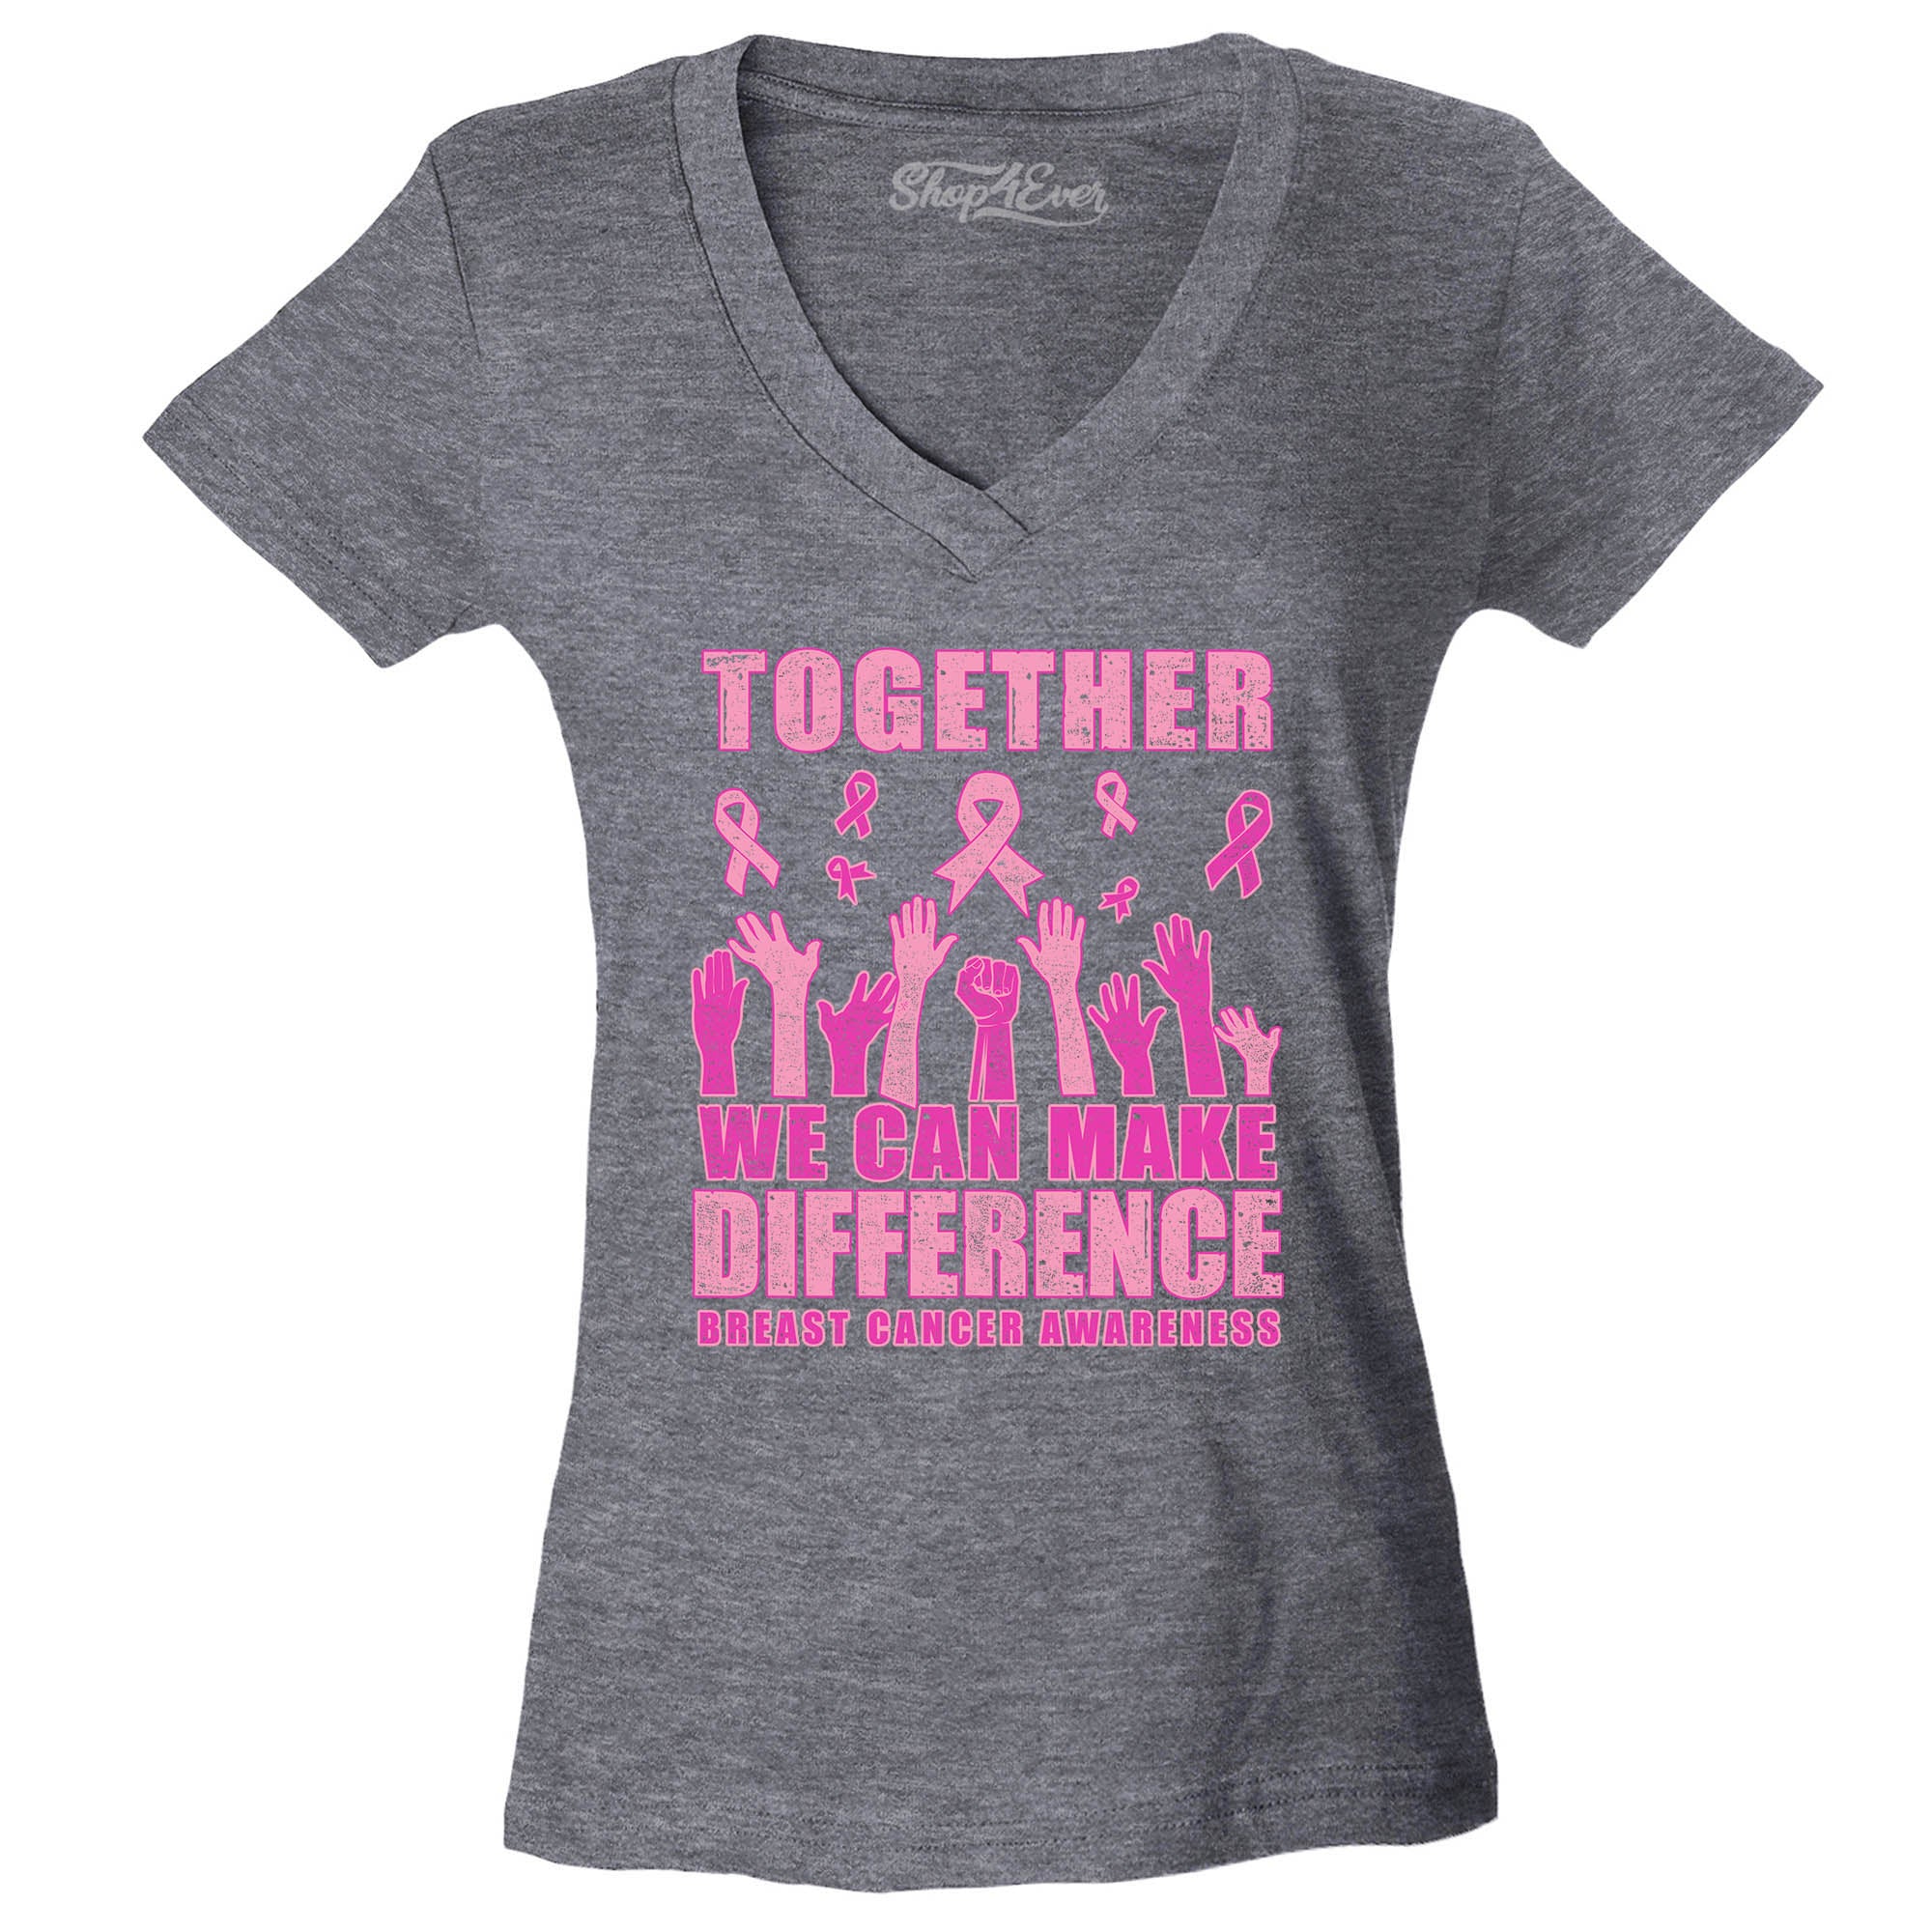 Together We Can Make A Difference Breast Cancer Awareness Women's V-Neck T-Shirt Slim Fit